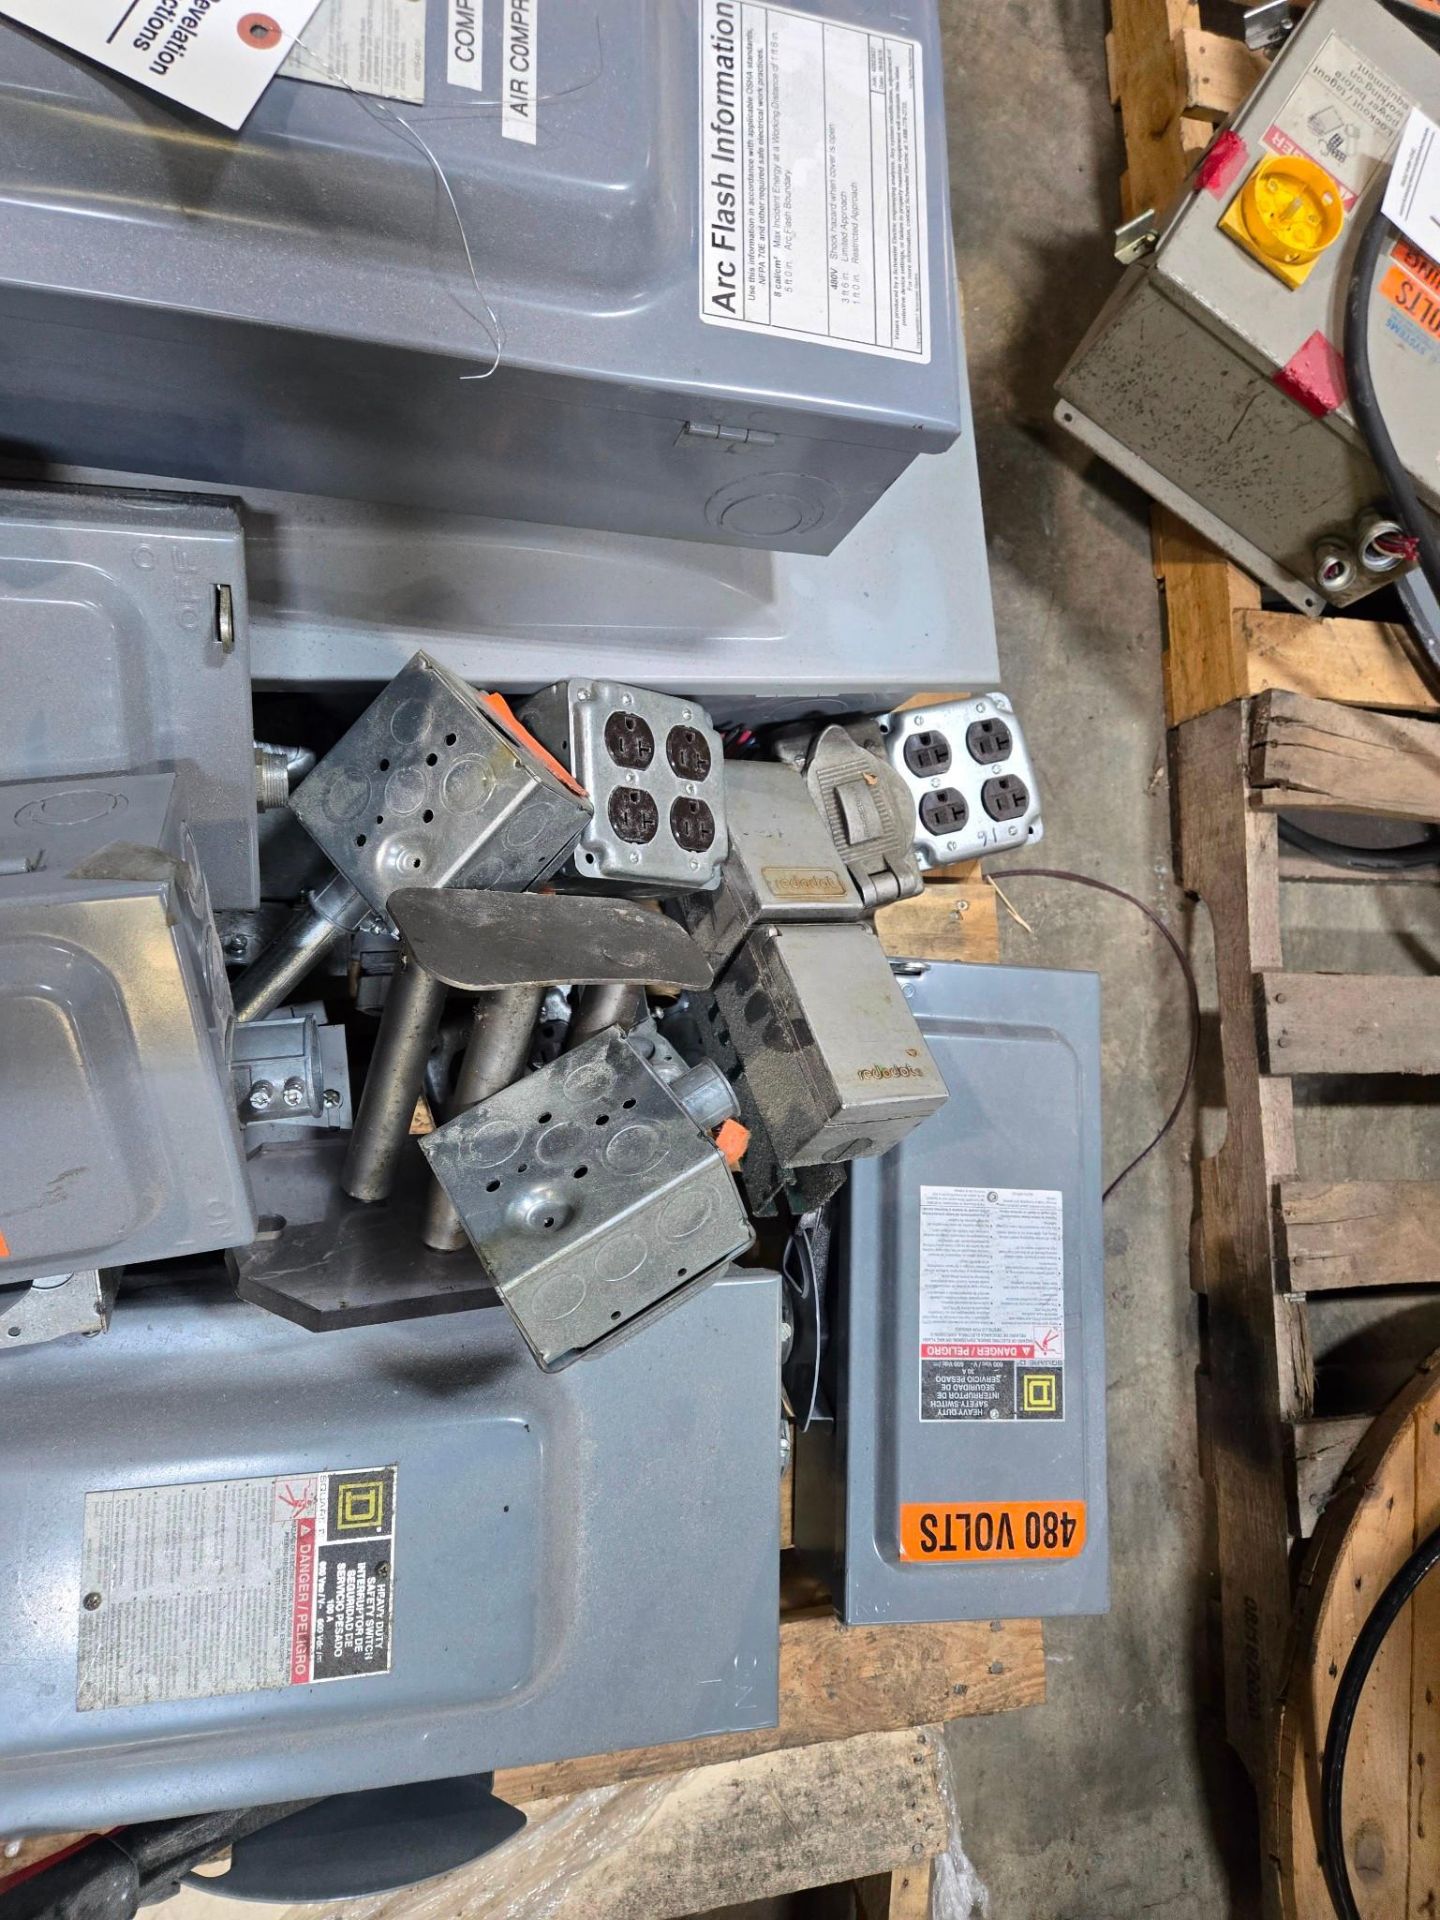 SKID OF ELECTRICAL EQUIPMENT, (8) ASSORTED BREAKER BOXES - Image 4 of 10